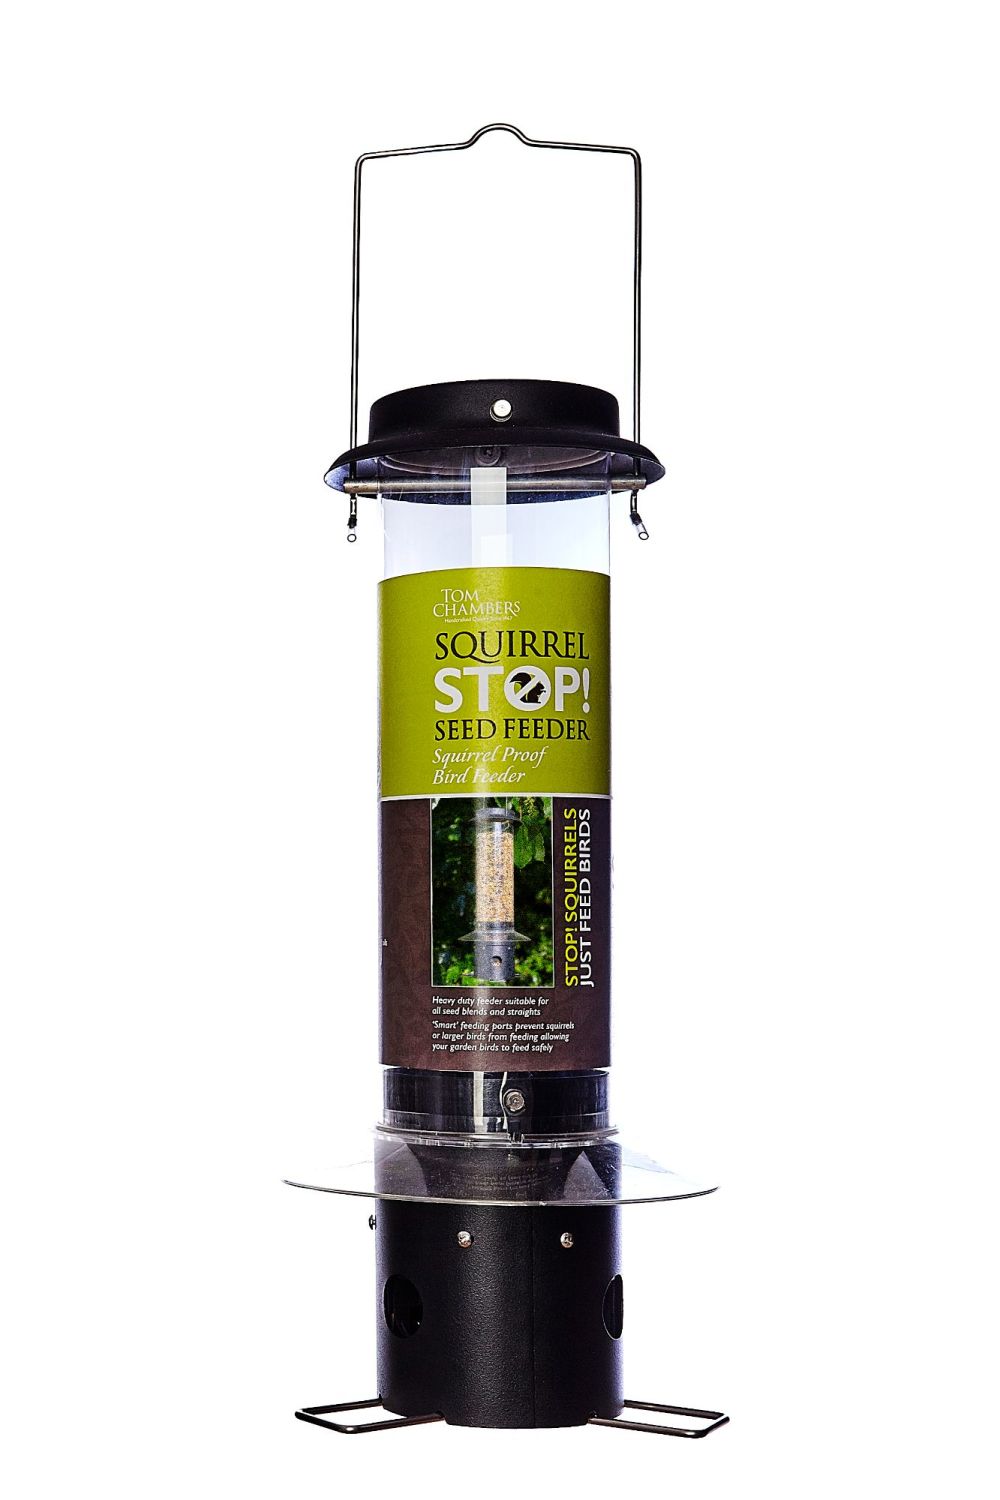 SQUIRREL STOP SEED FEEDER